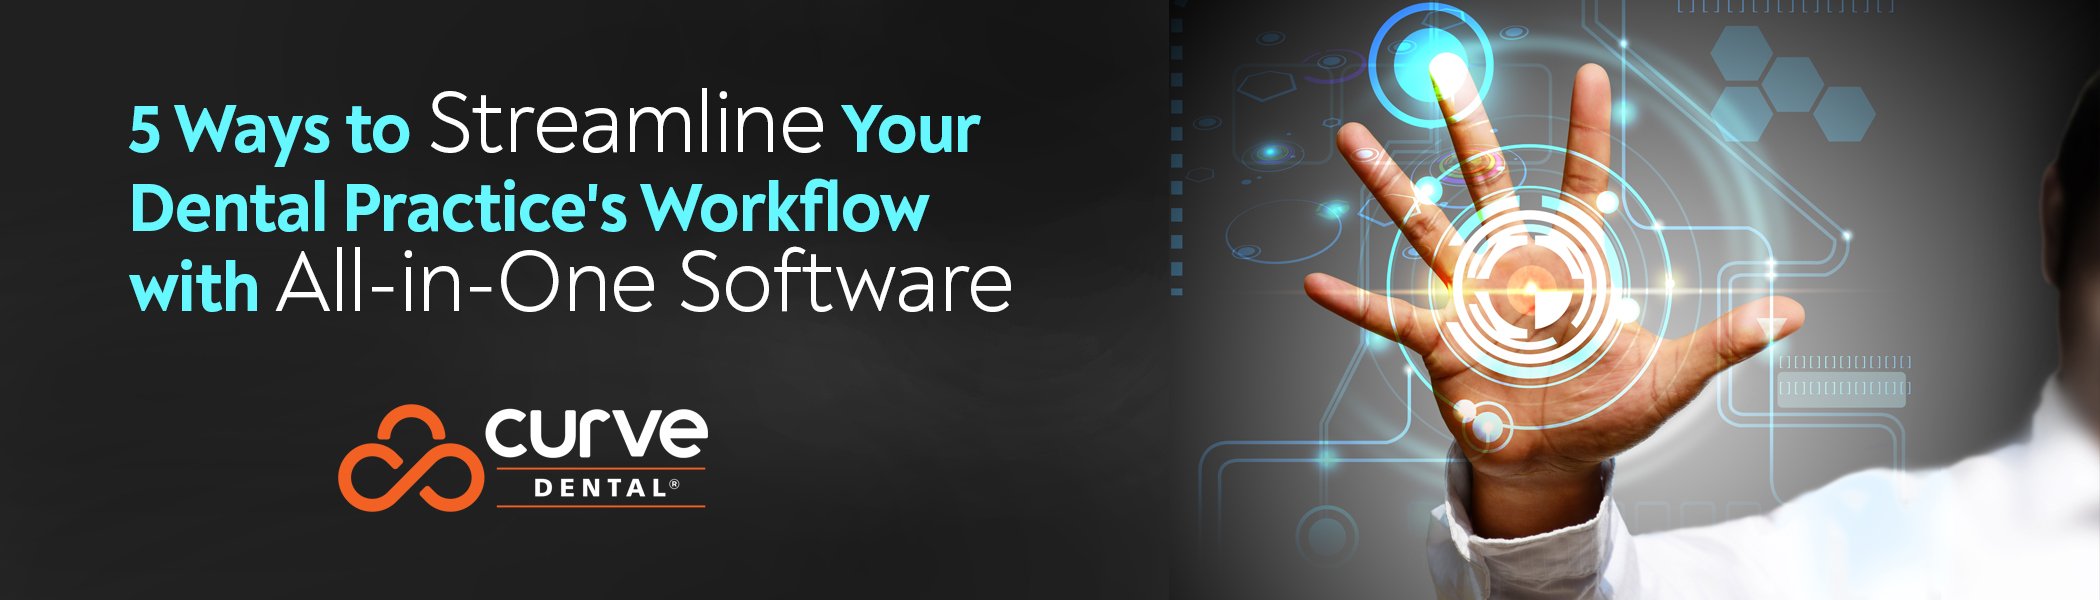 5 Ways to Streamline Your Dental Practice's Workflow with All-in